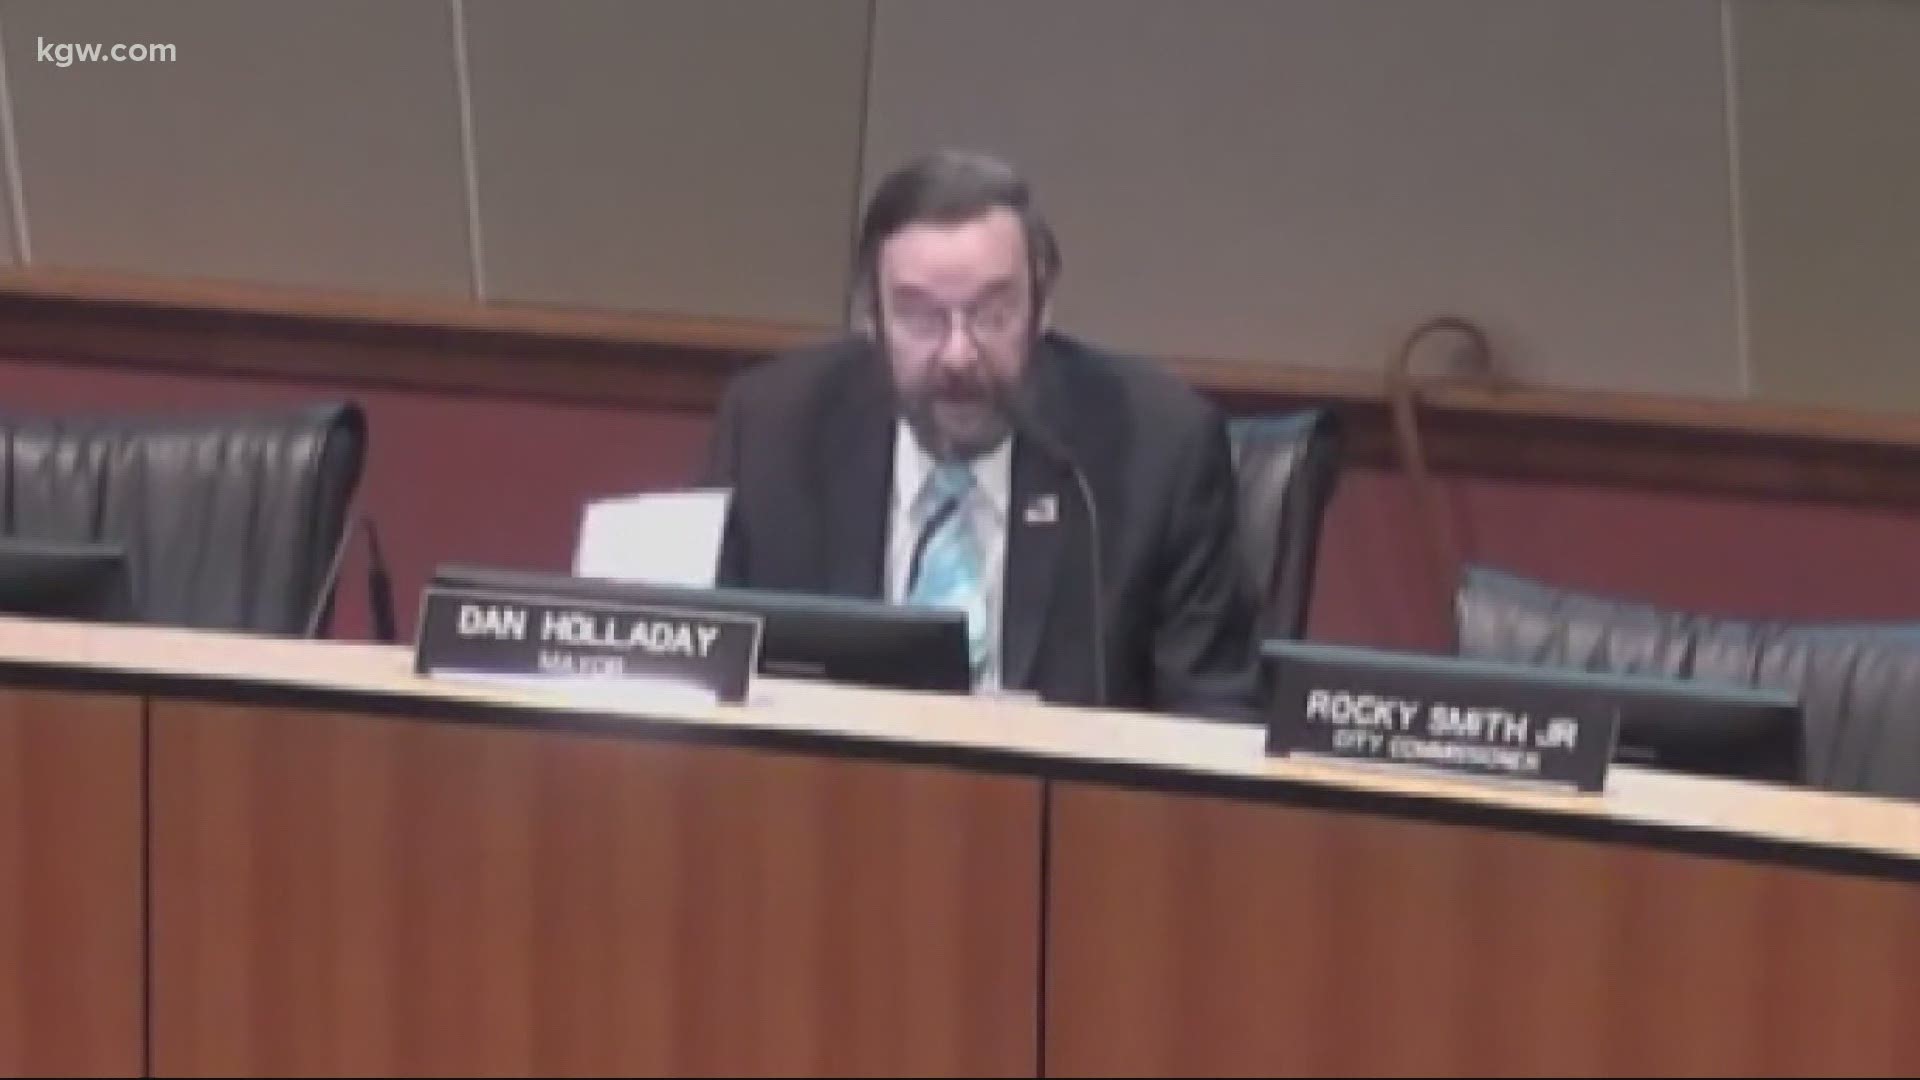 Oregon City mayor Dan Holladay has been stirring up controversy for a little while now. So, how did we get here?